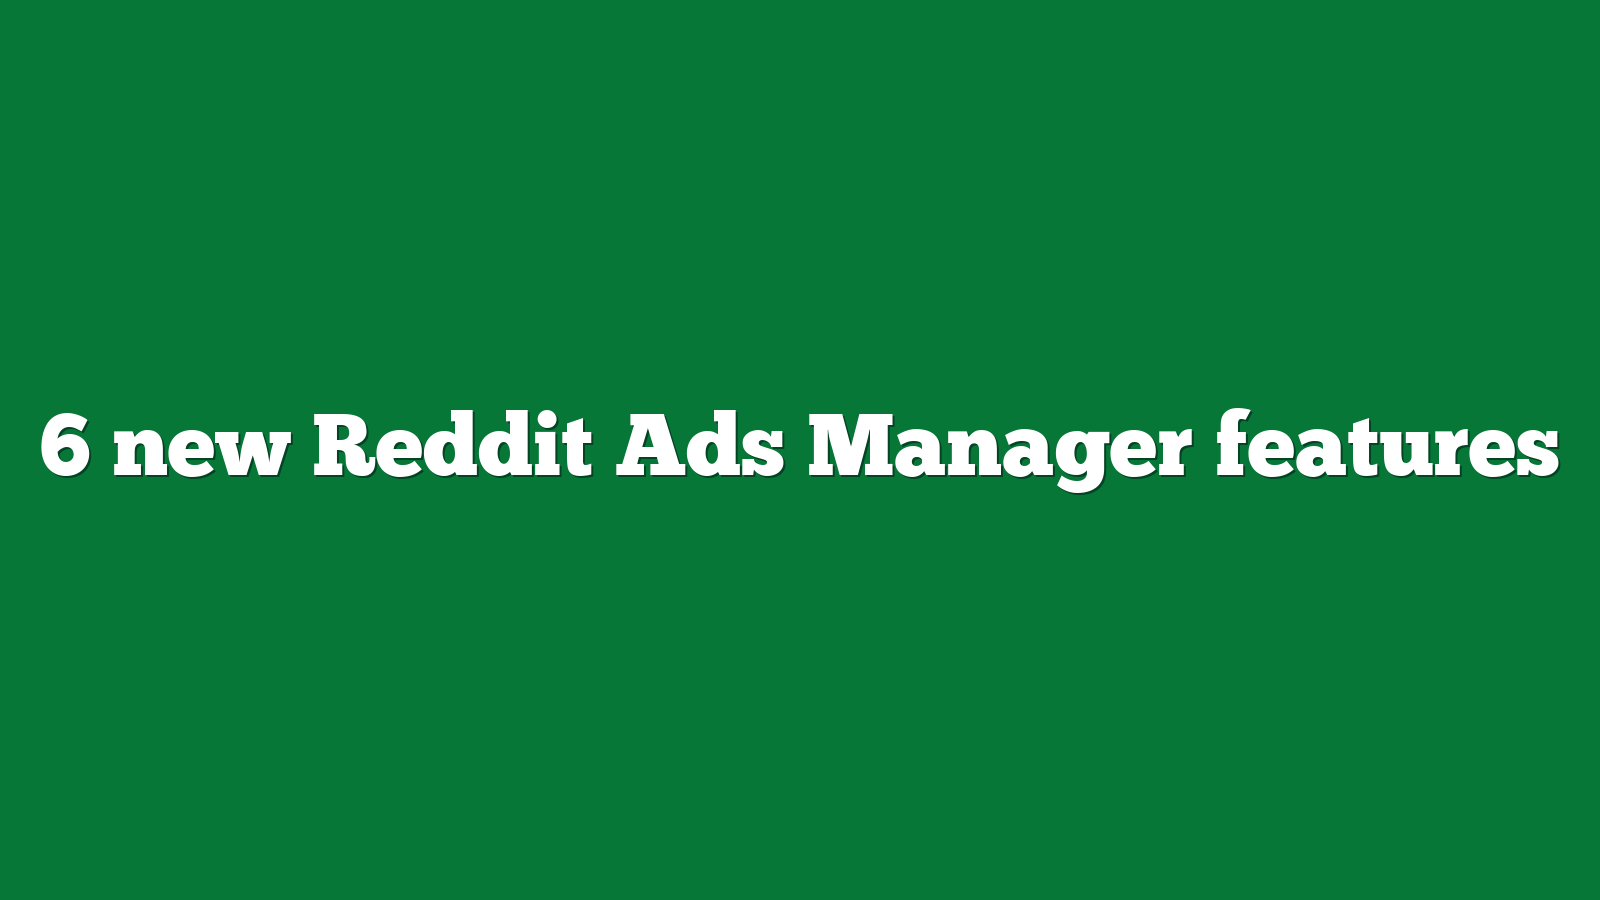 6 new Reddit Ads Manager features